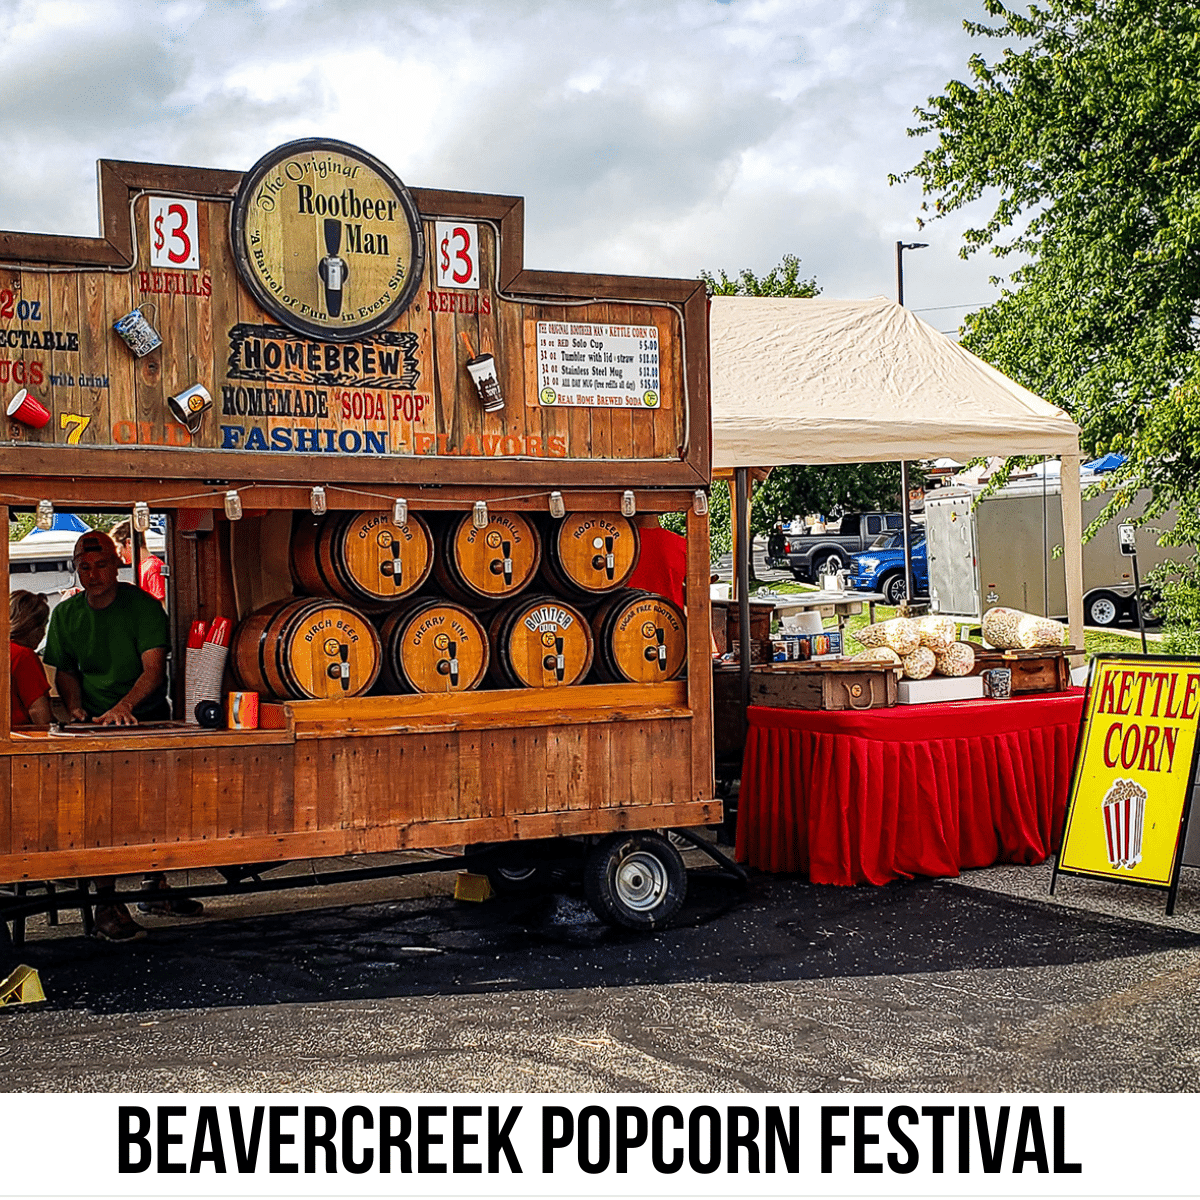 square image with a photo of home brew booth and a kettle corn booth a white strip across the bottom has the text Beavercreek Popcorn Festival. Photo credit: Cindy Gordon of VisitOhioToday.com